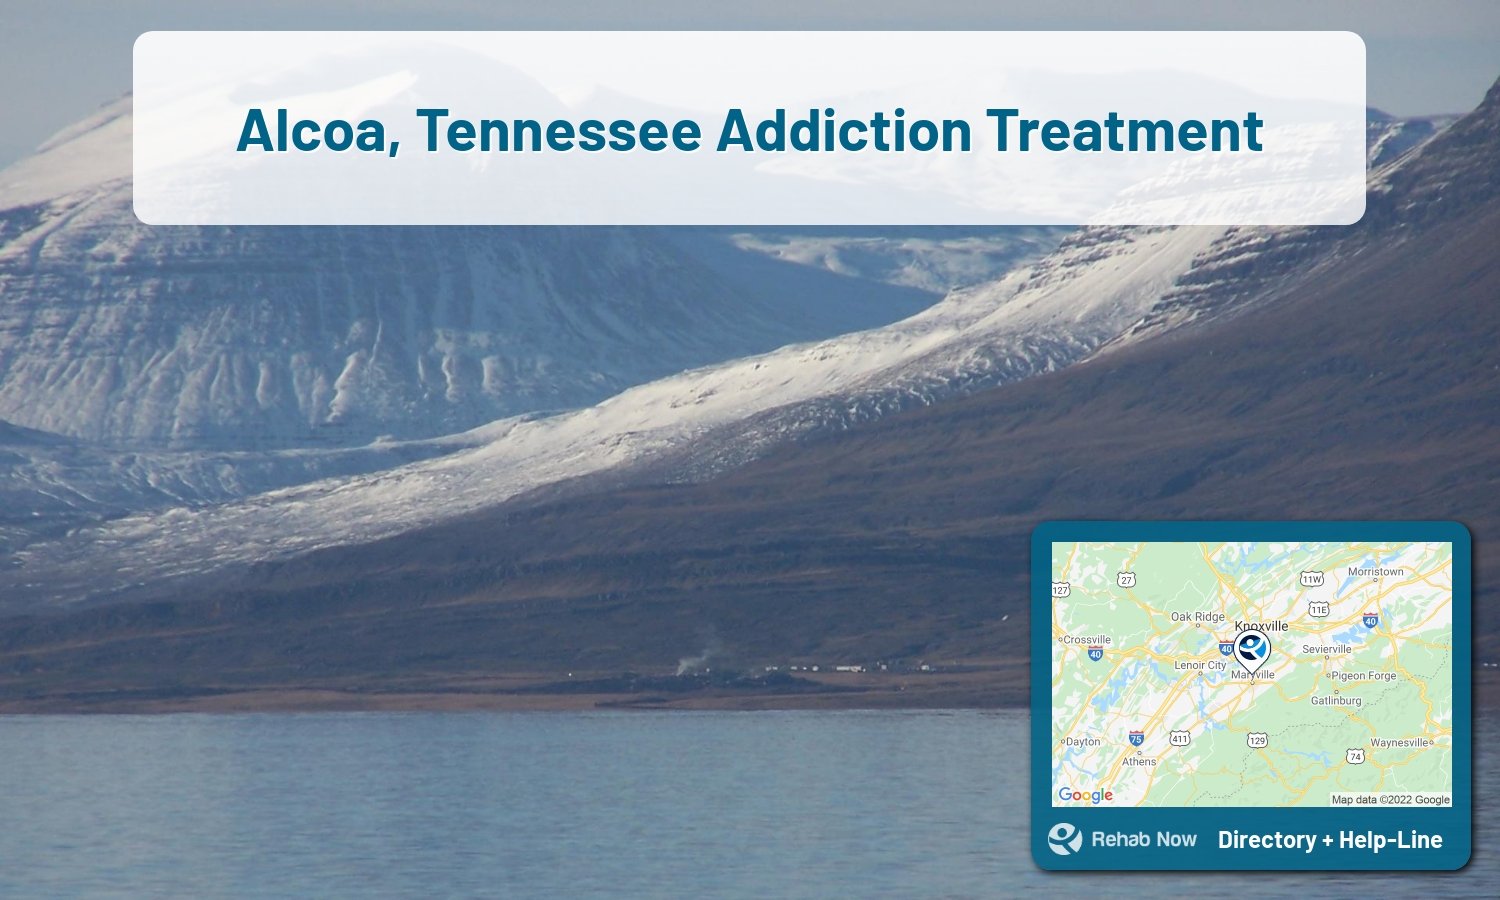 Drug rehab and alcohol treatment services nearby Alcoa, TN. Need help choosing a treatment program? Call our free hotline!